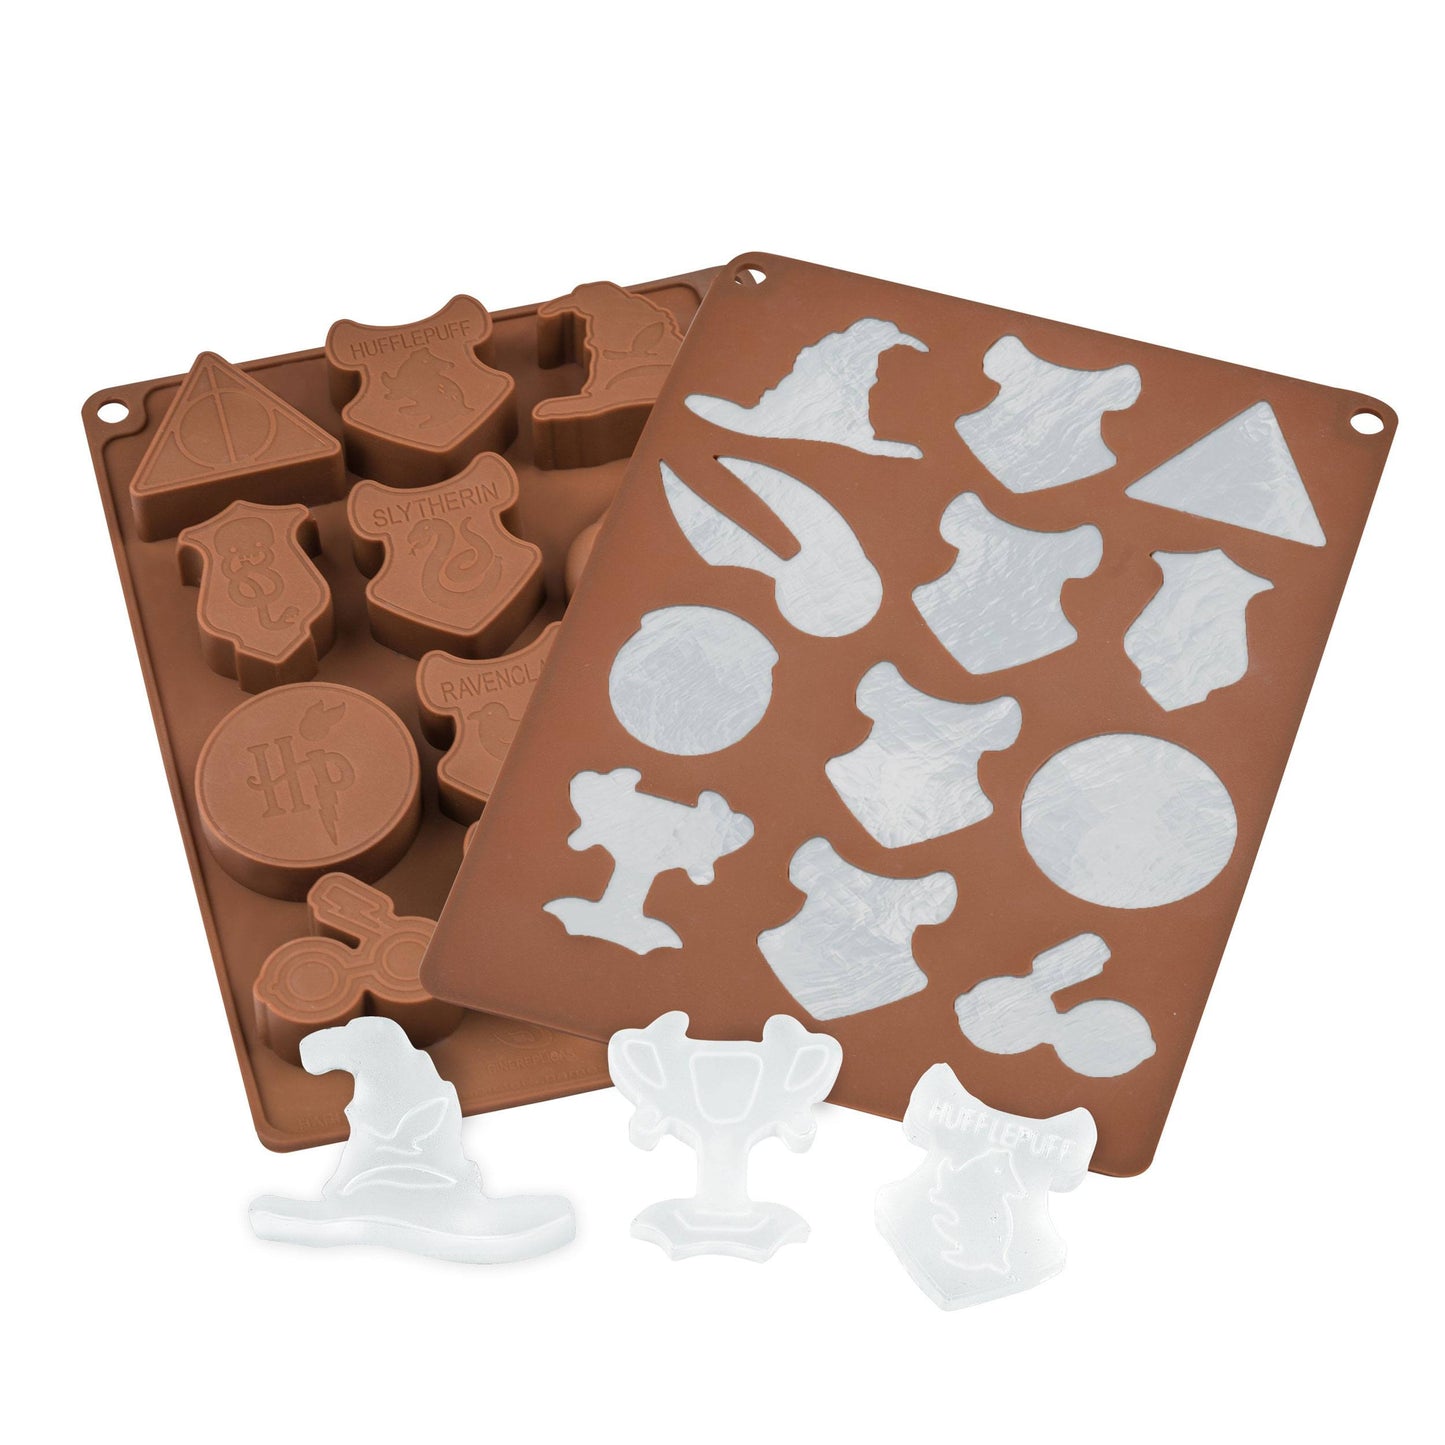 Harry Potter Chocolate Mold / Ice Cubes - Logos